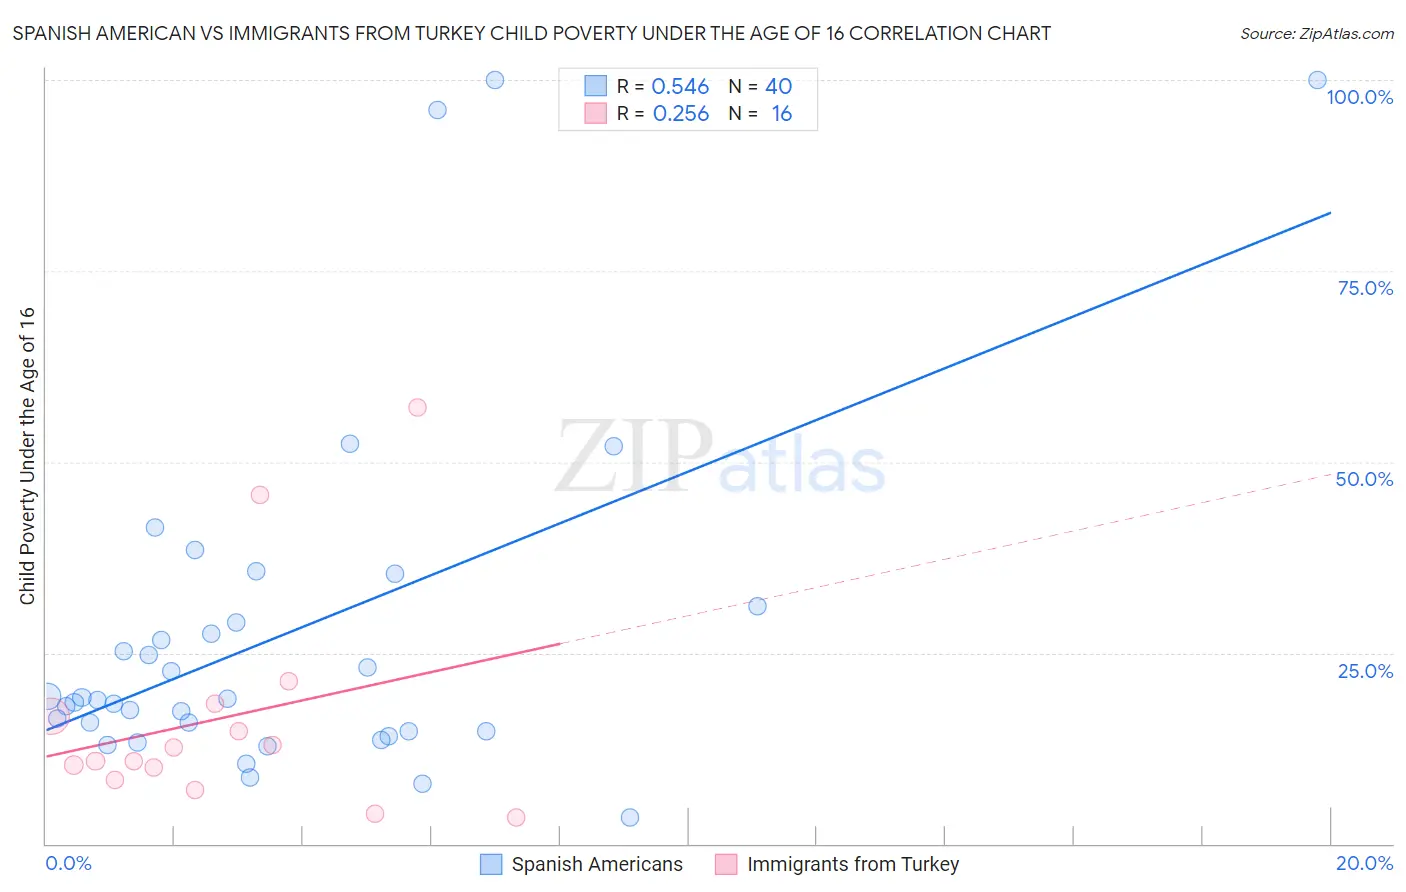 Spanish American vs Immigrants from Turkey Child Poverty Under the Age of 16